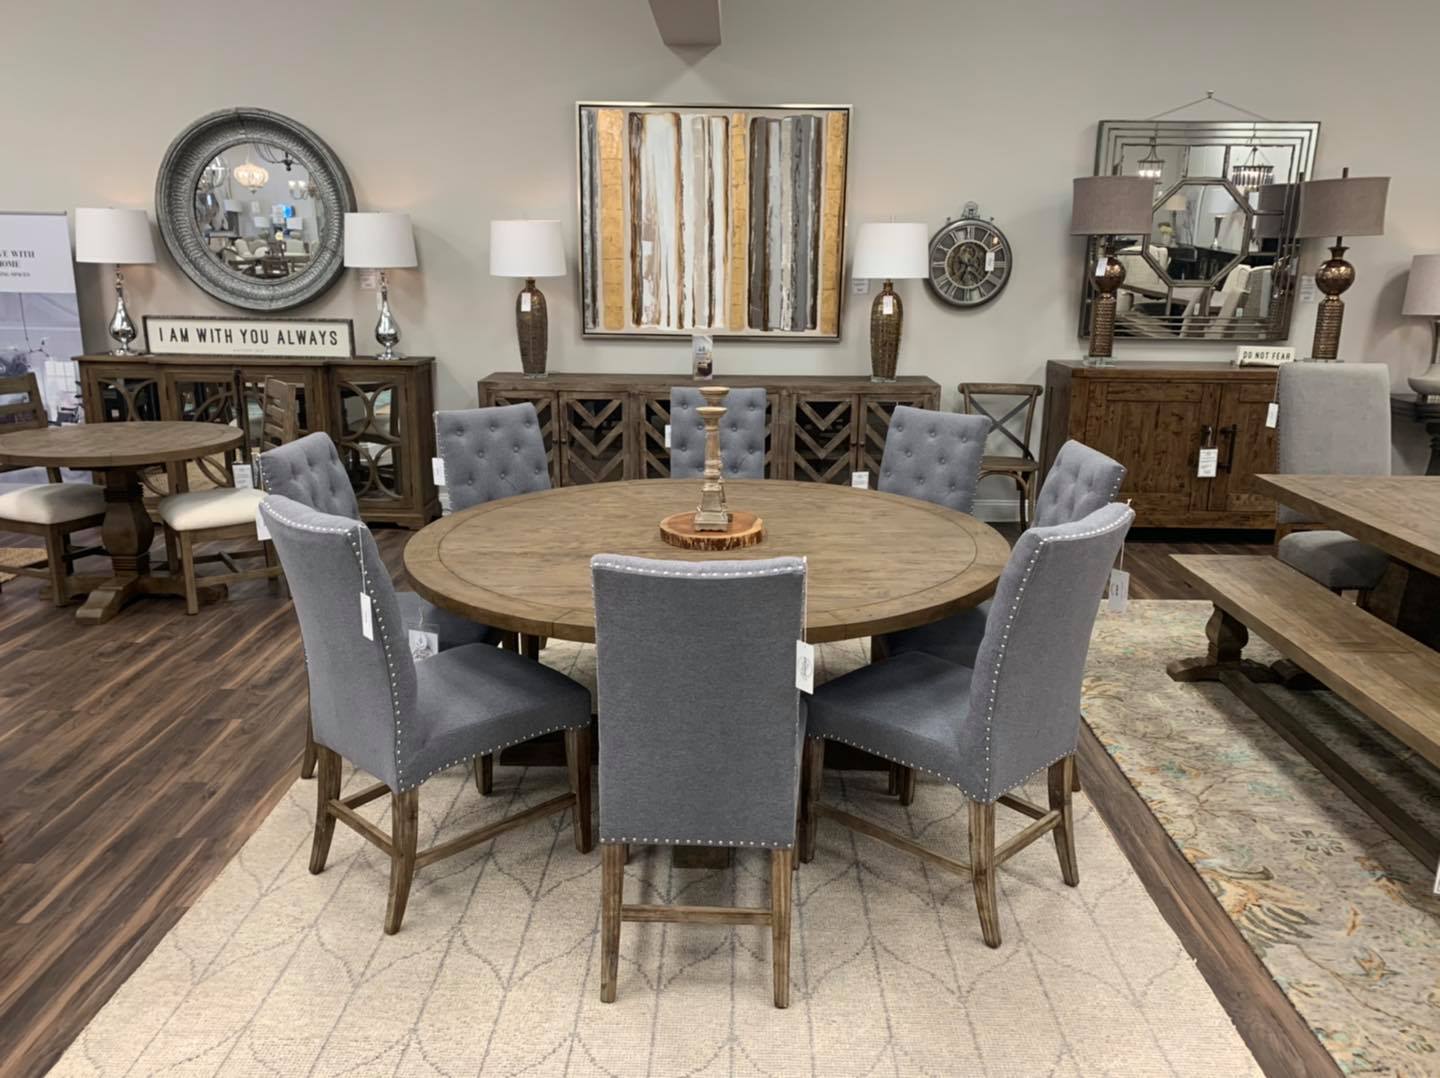 72 Inch Round Dining Room Tables Sale